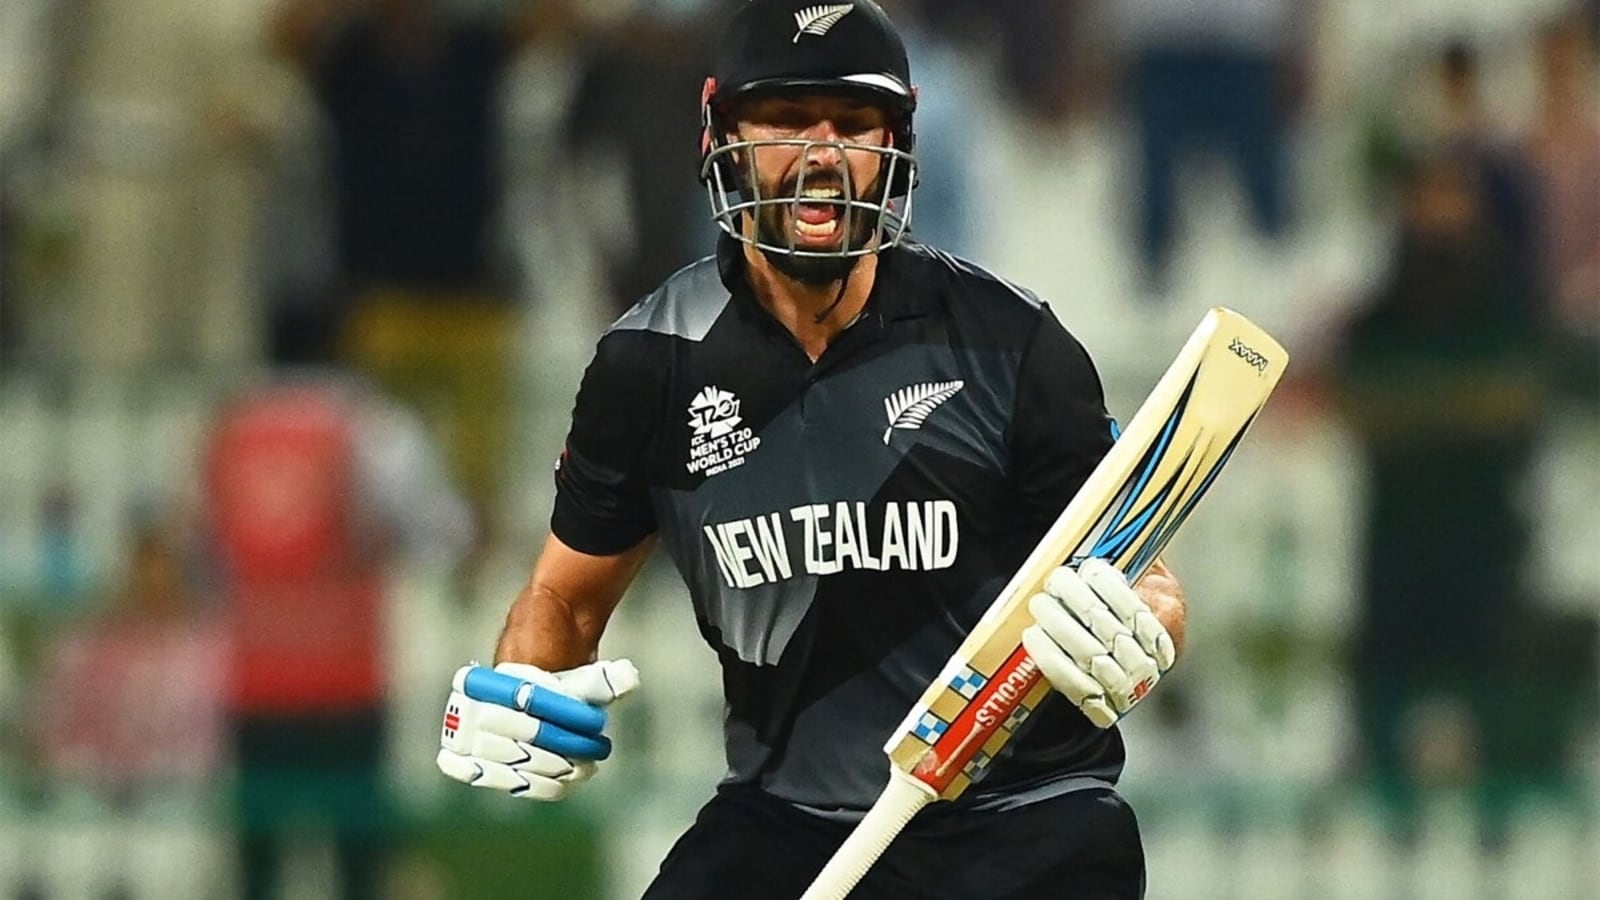 Simon Doull gives epic MS Dhoni reference as Daryl Mitchell guides New Zealand to thrilling win vs England in semifinal | Cricket - Hindustan Times